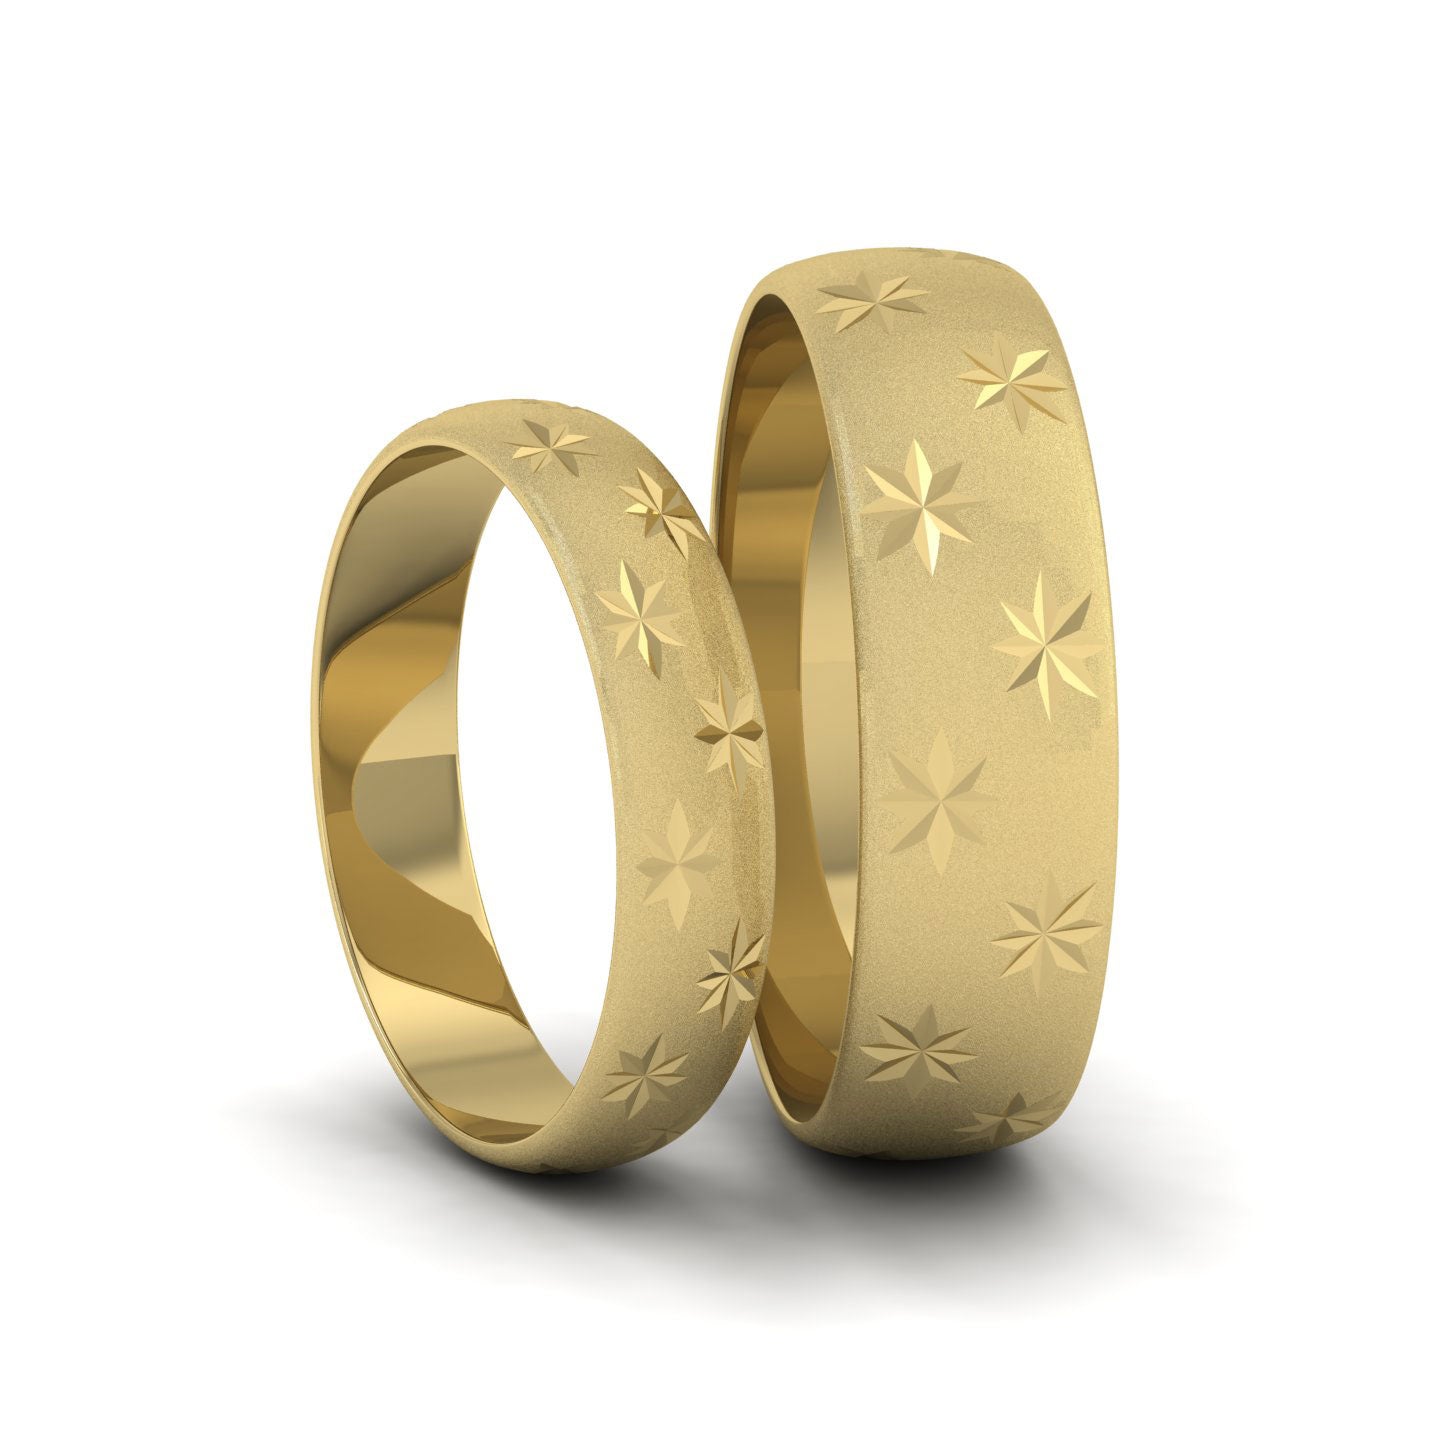 Star Patterned 22ct Yellow Gold 6mm Wedding Ring